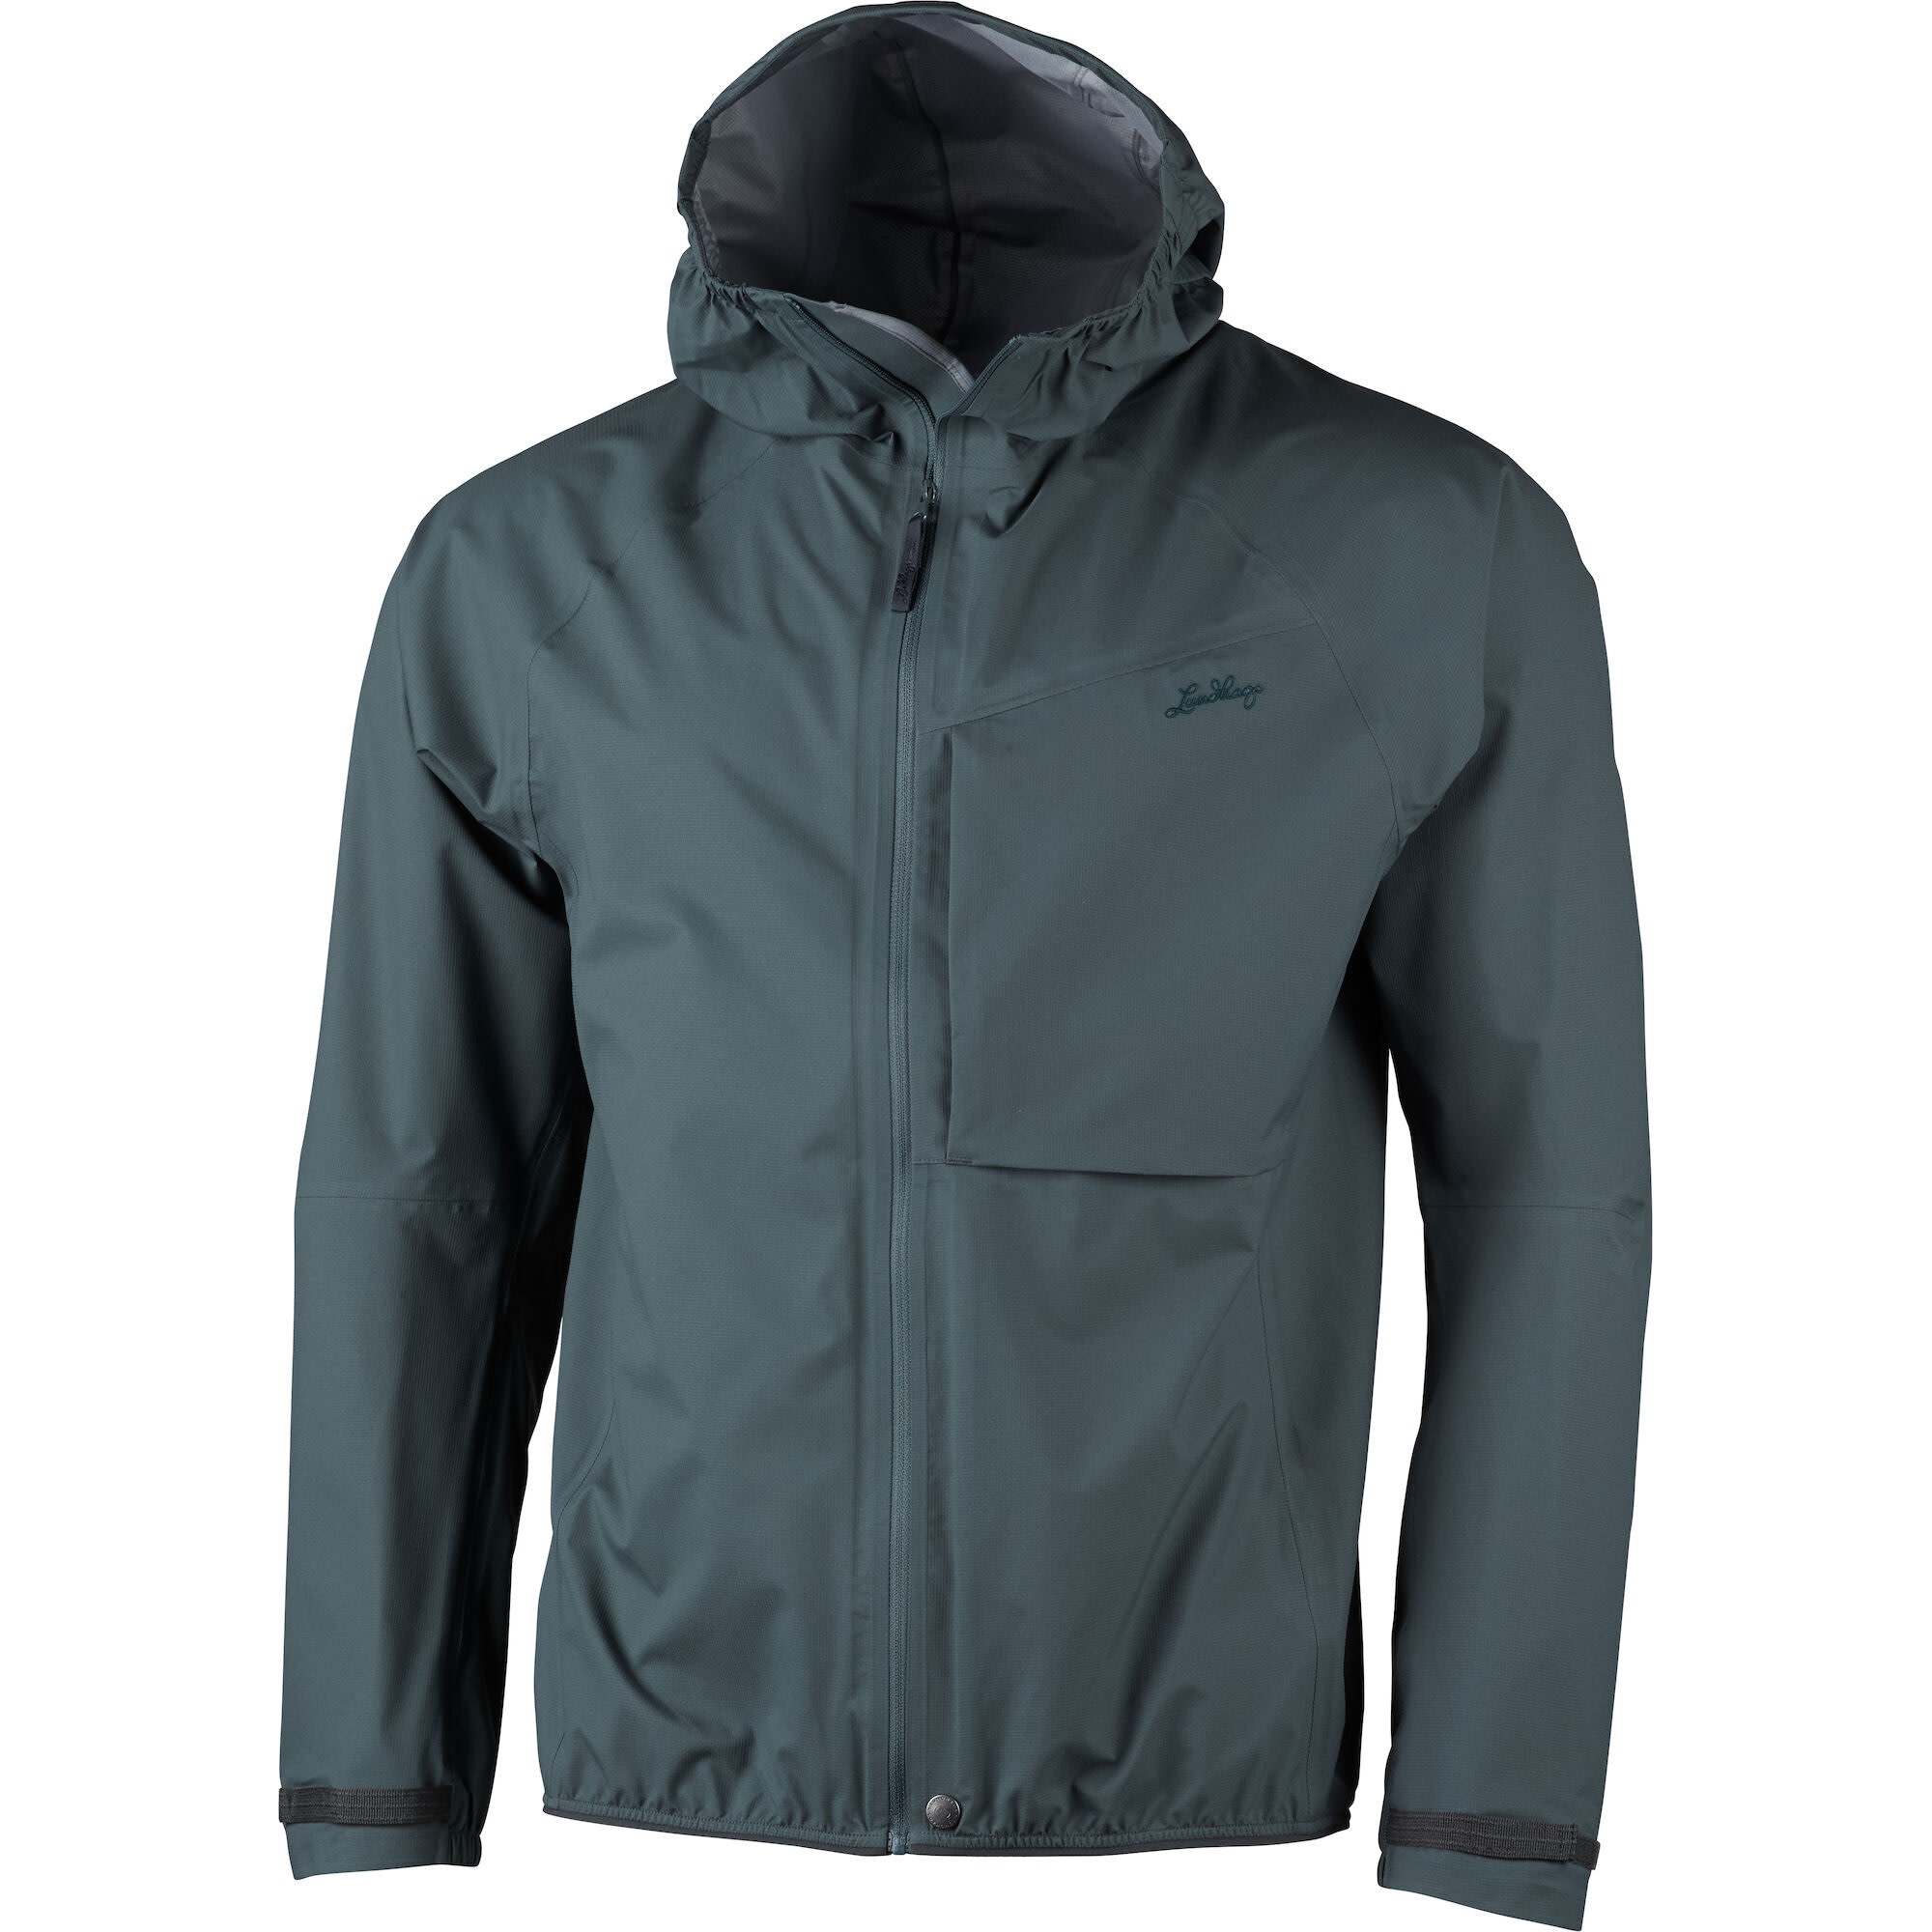 Lundhags Men’s Lo Jacket Dk Agave